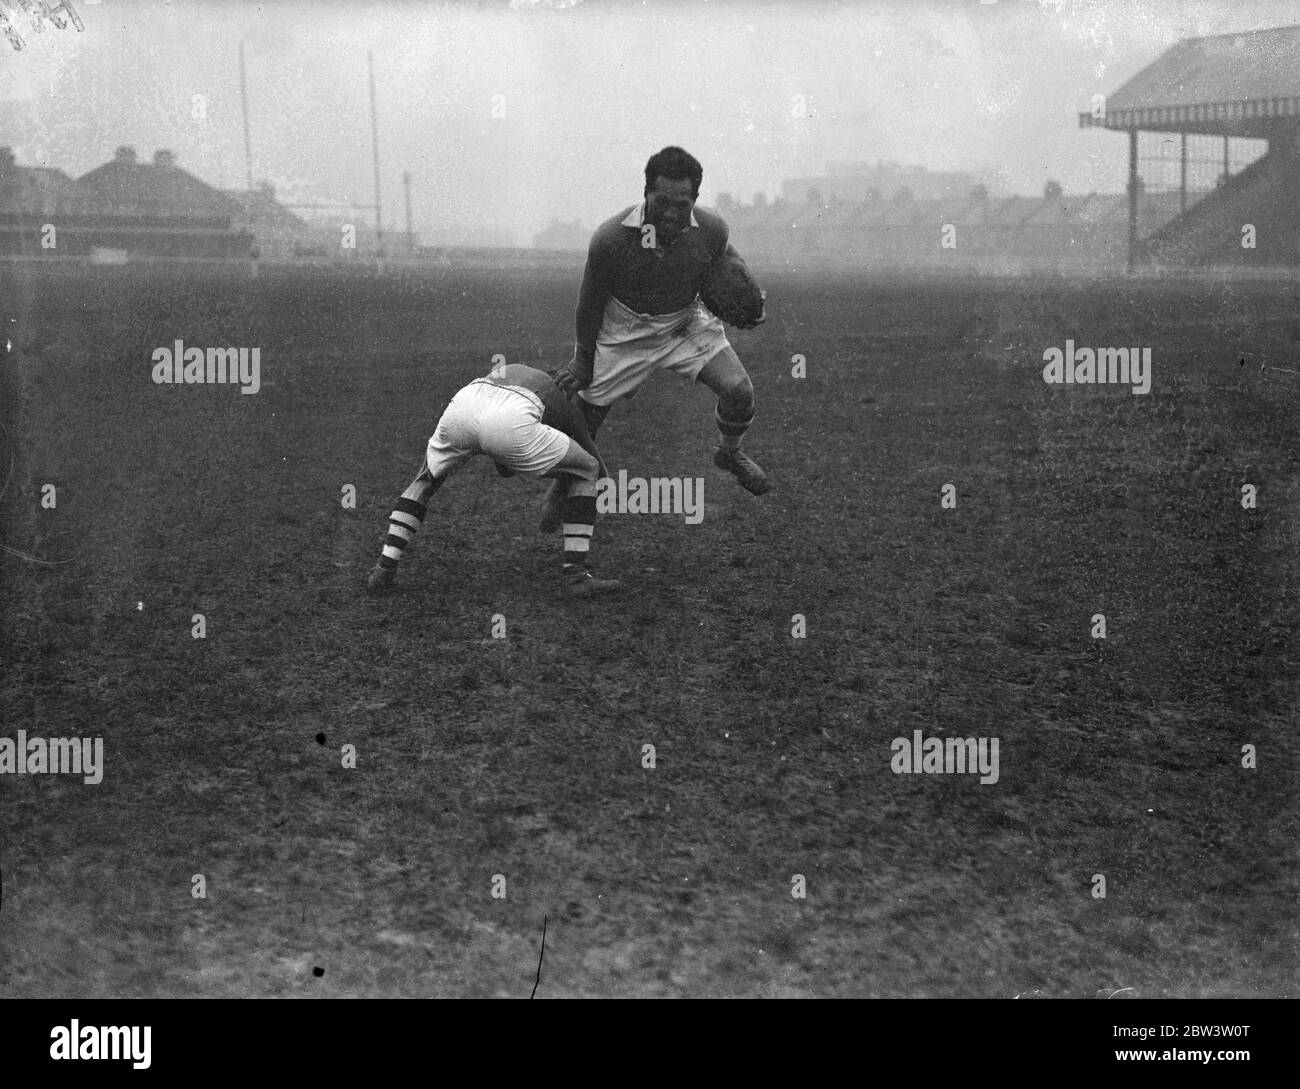 George Nepia , famous all black , has trial before debut in London league rugby . George Nepia , considered the greatest rugby full back since the war , had a trial at Mitchs Stadium , having arrived in London to play rugby league football for the Streatham and Mitcham Club . Nepia casued a sensation in 1924 when he was a star member of that famous all black side . Nepia has hopes of playing tomorow ( Saturday ) against Wigan , but the decidion depends on the result of his tryout today . Photo shows , George Nepia handing off an opponenet during the trial at Mitcham . 13 December 1935 Stock Photo